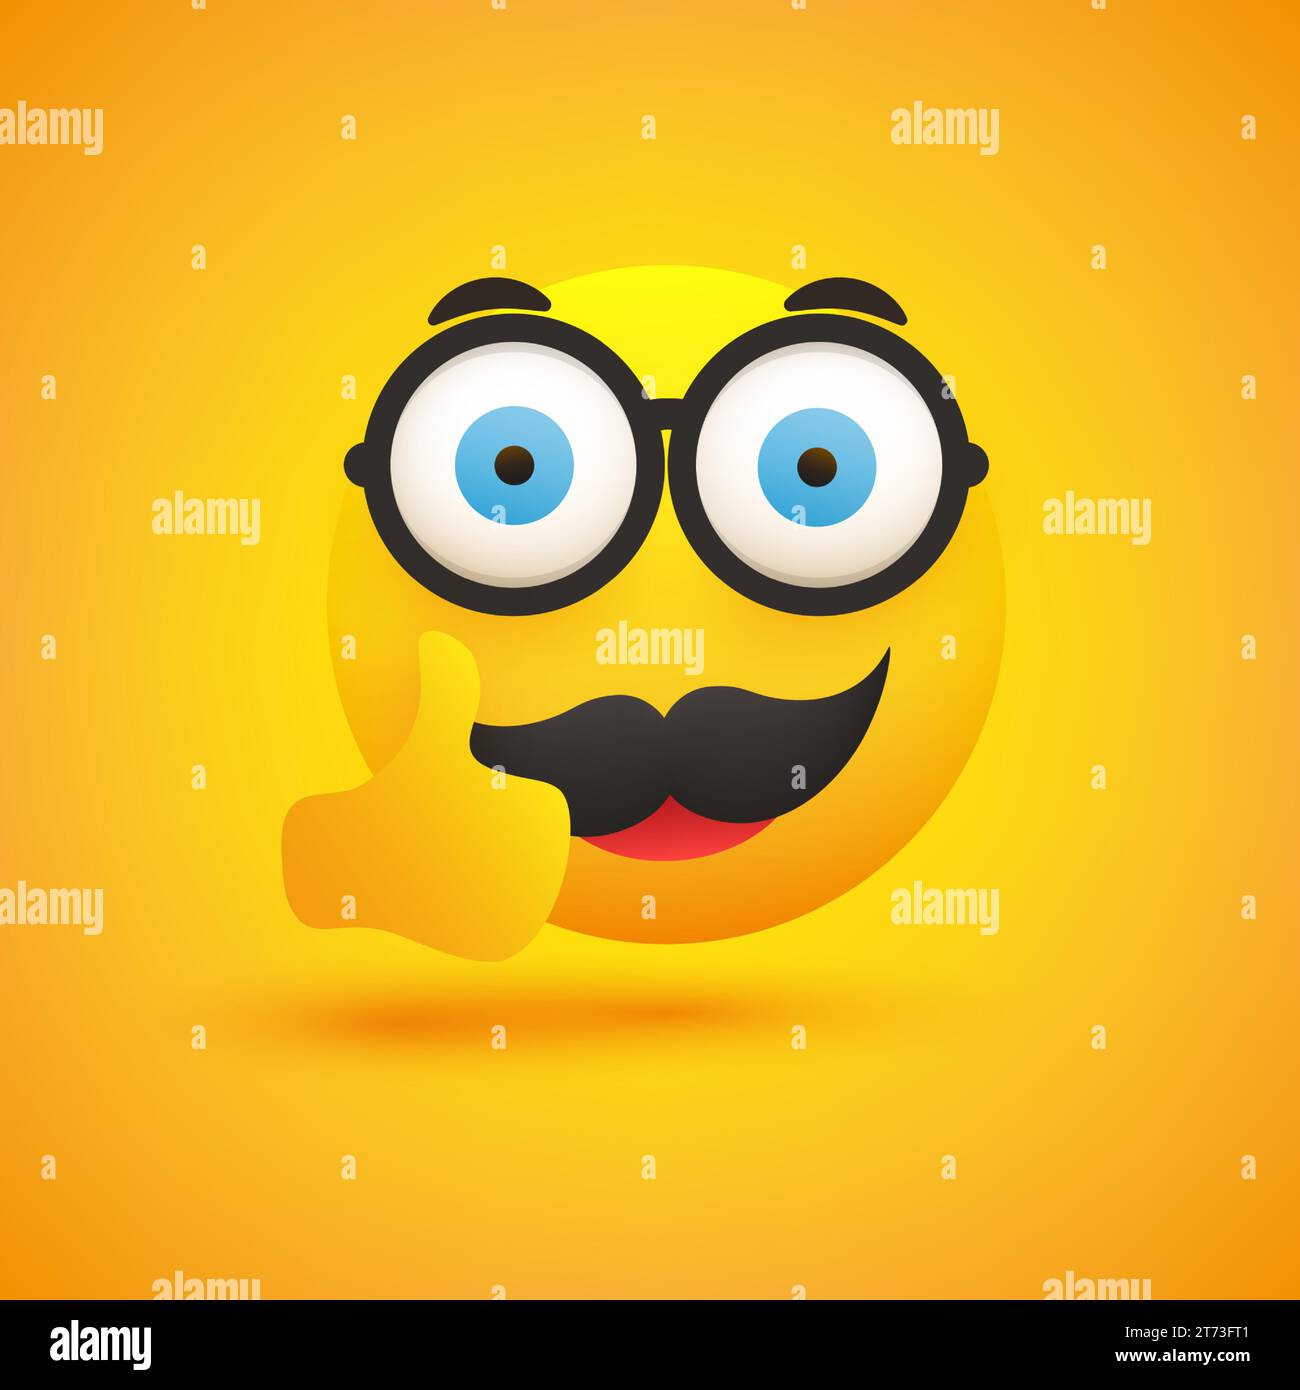 Smiling Nerd Emoji - Simple Happy Male Emoticon with Glasses and Mustache Showing Thumbs Up on Yellow Background - Vector Design for Web and Instant M Stock Vector